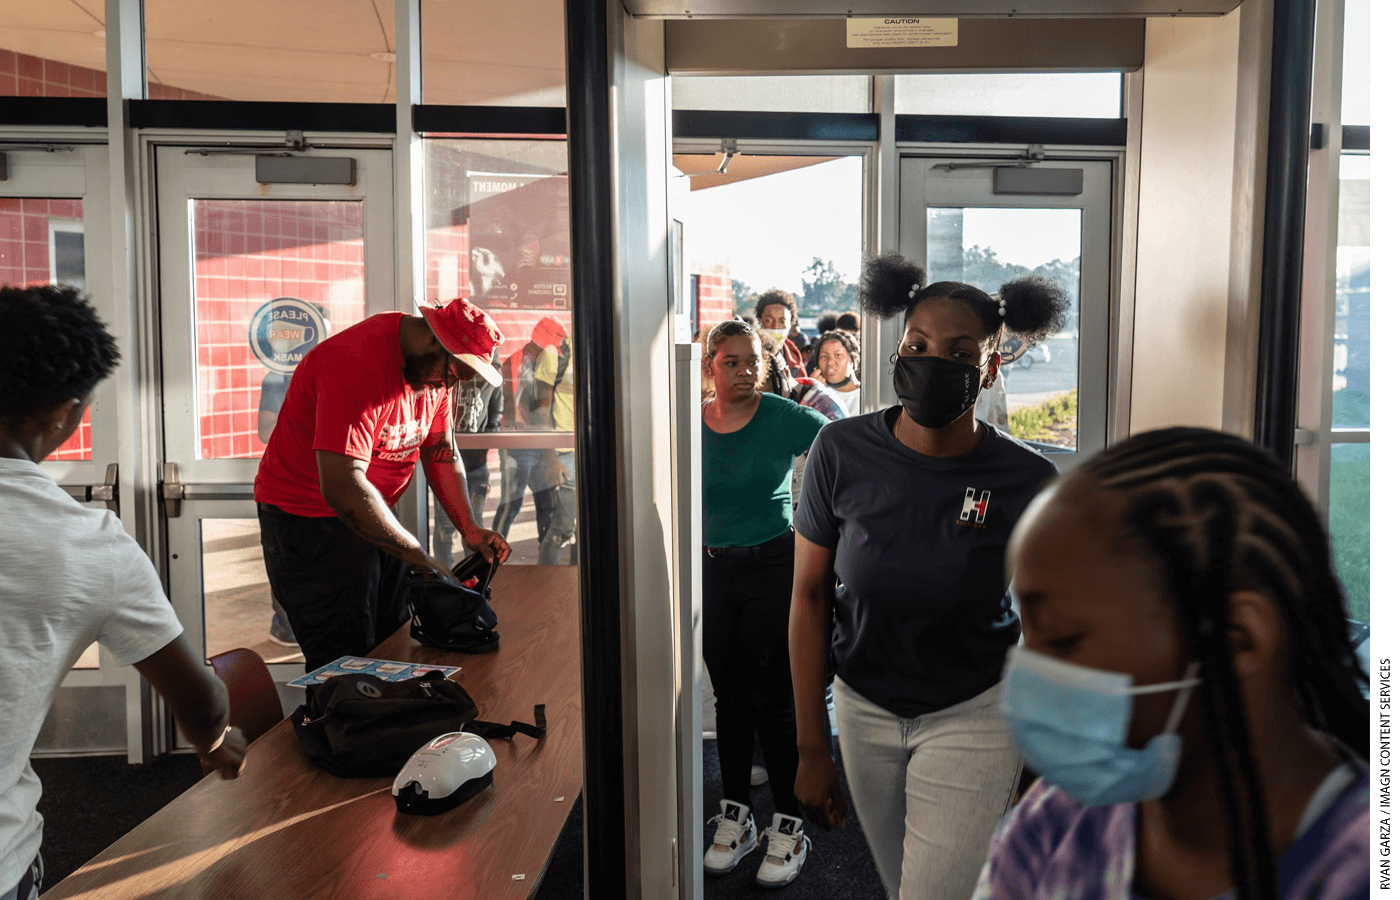 At Ecorse High School in Michigan, an example of target hardening: students go through a metal detector and have their bags searched by security as they enter the school building.